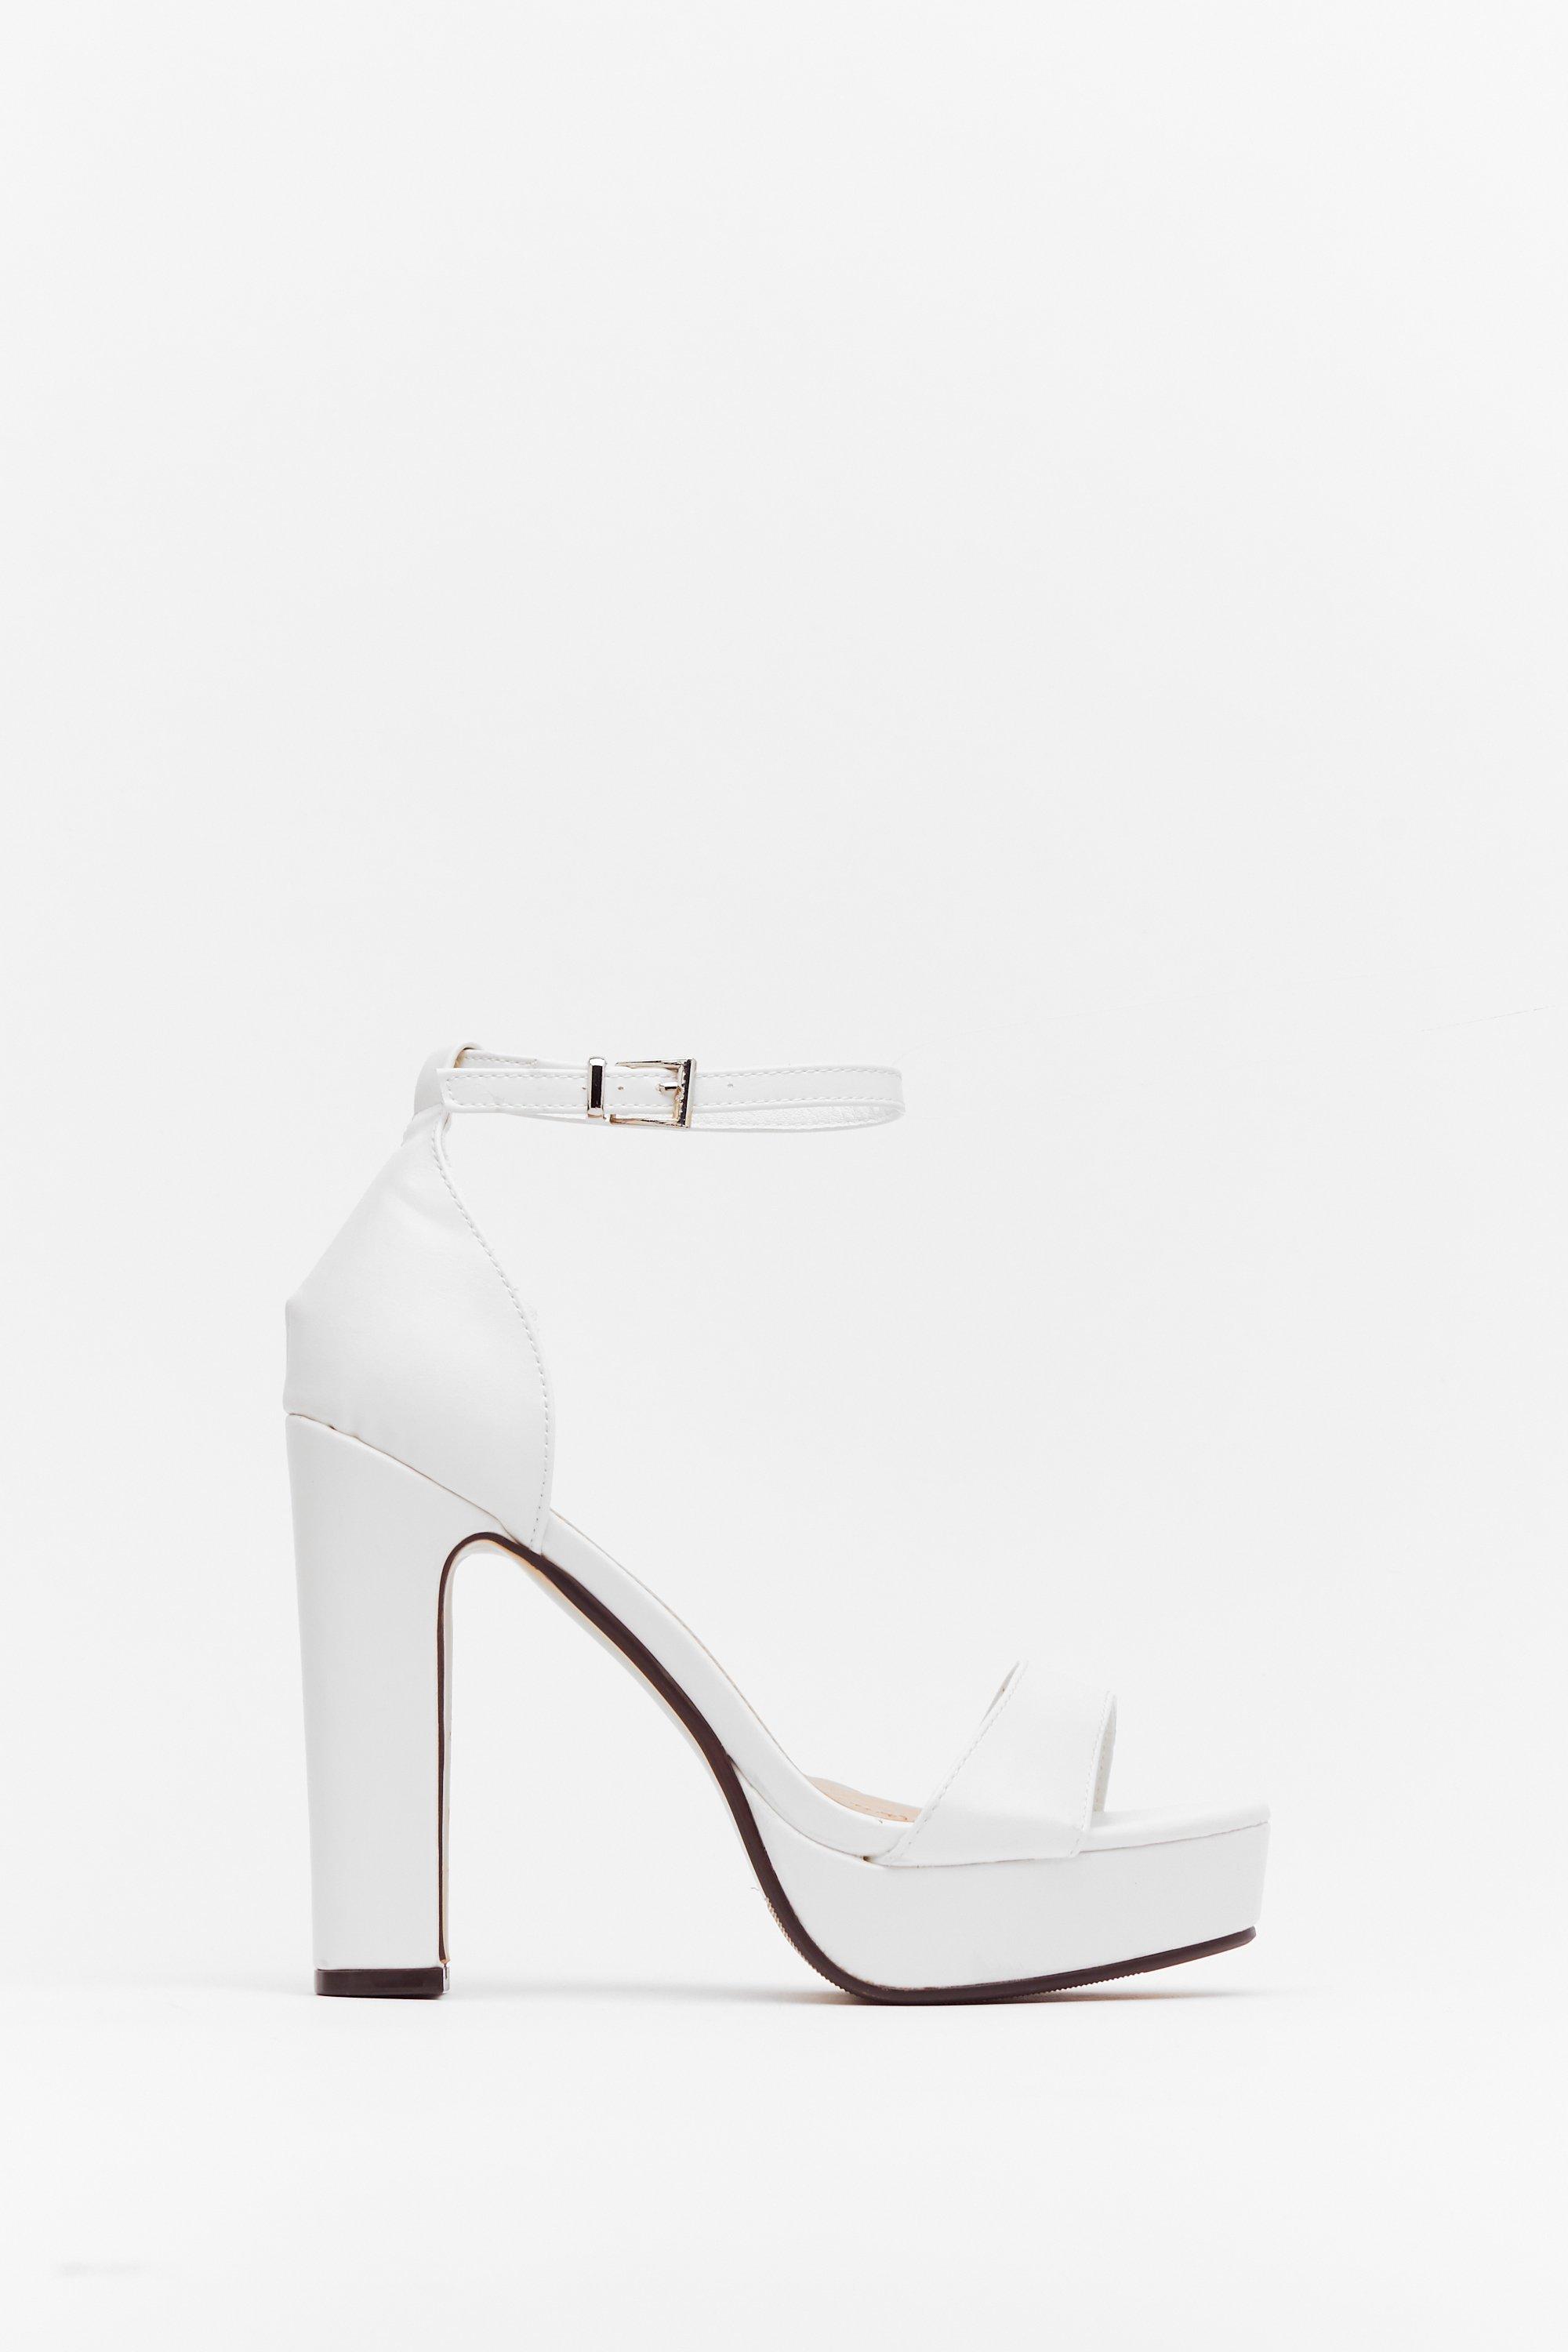 NastyGal Womens On the Rise Faux 